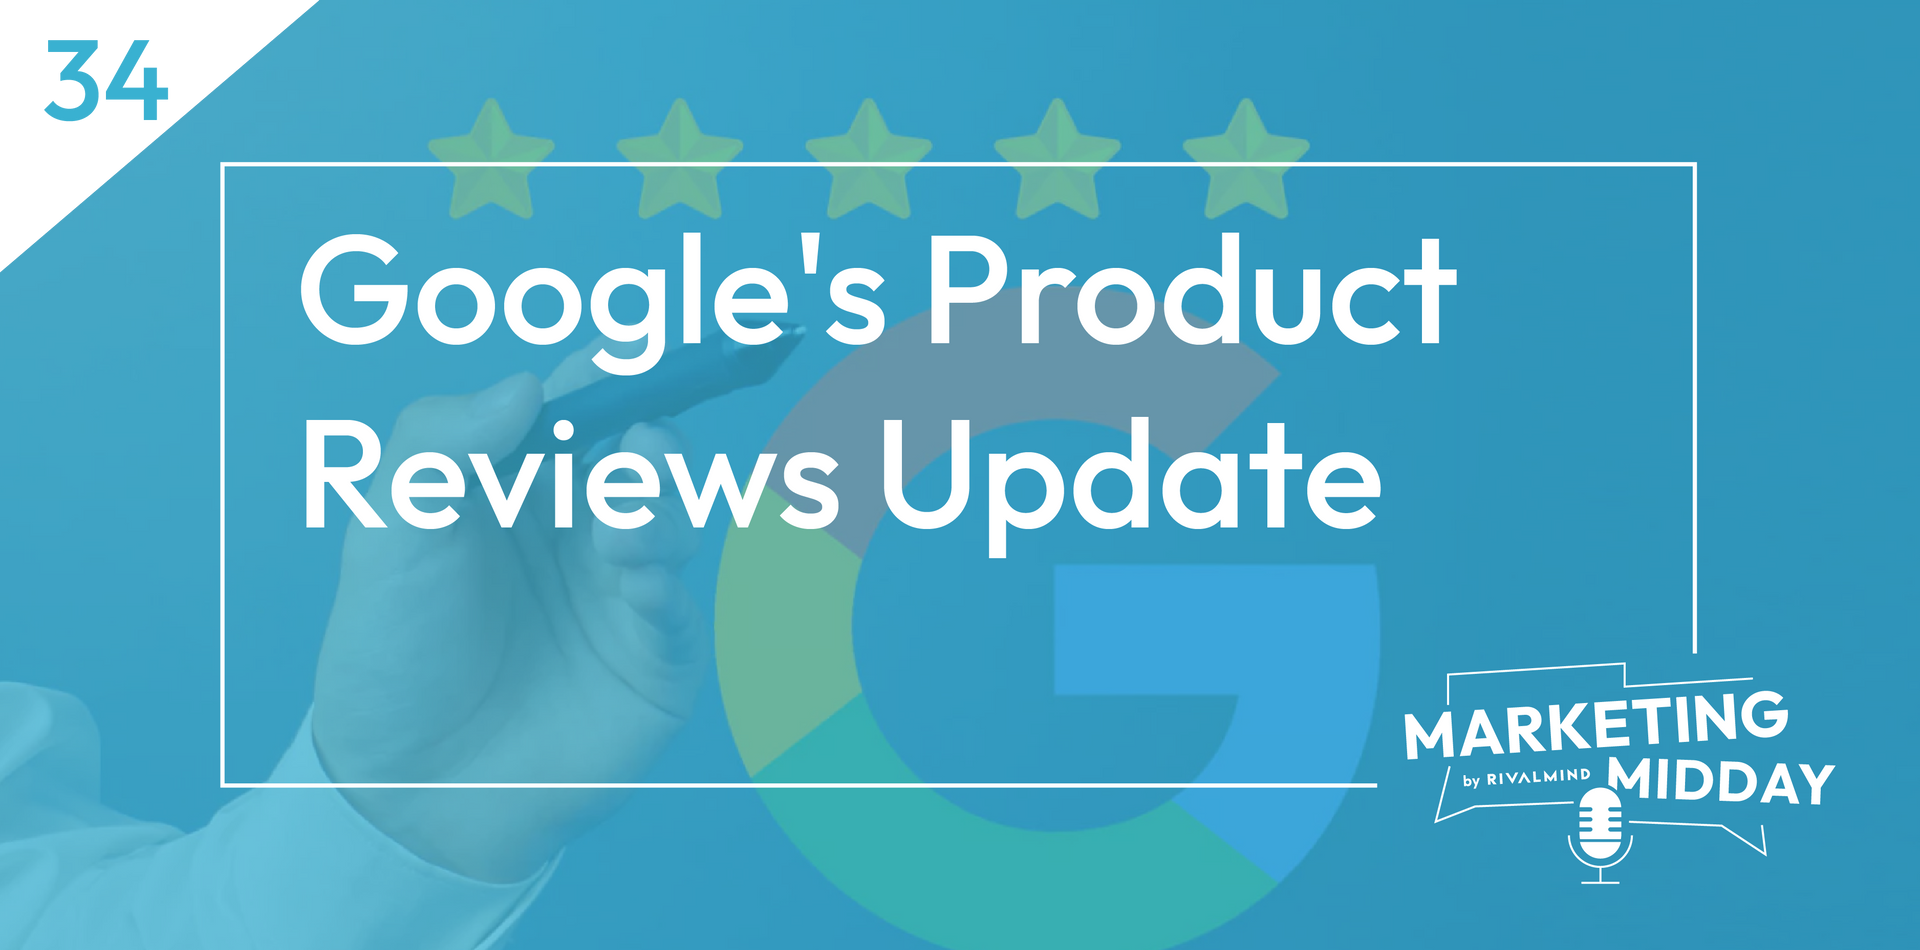 google's product reviews update